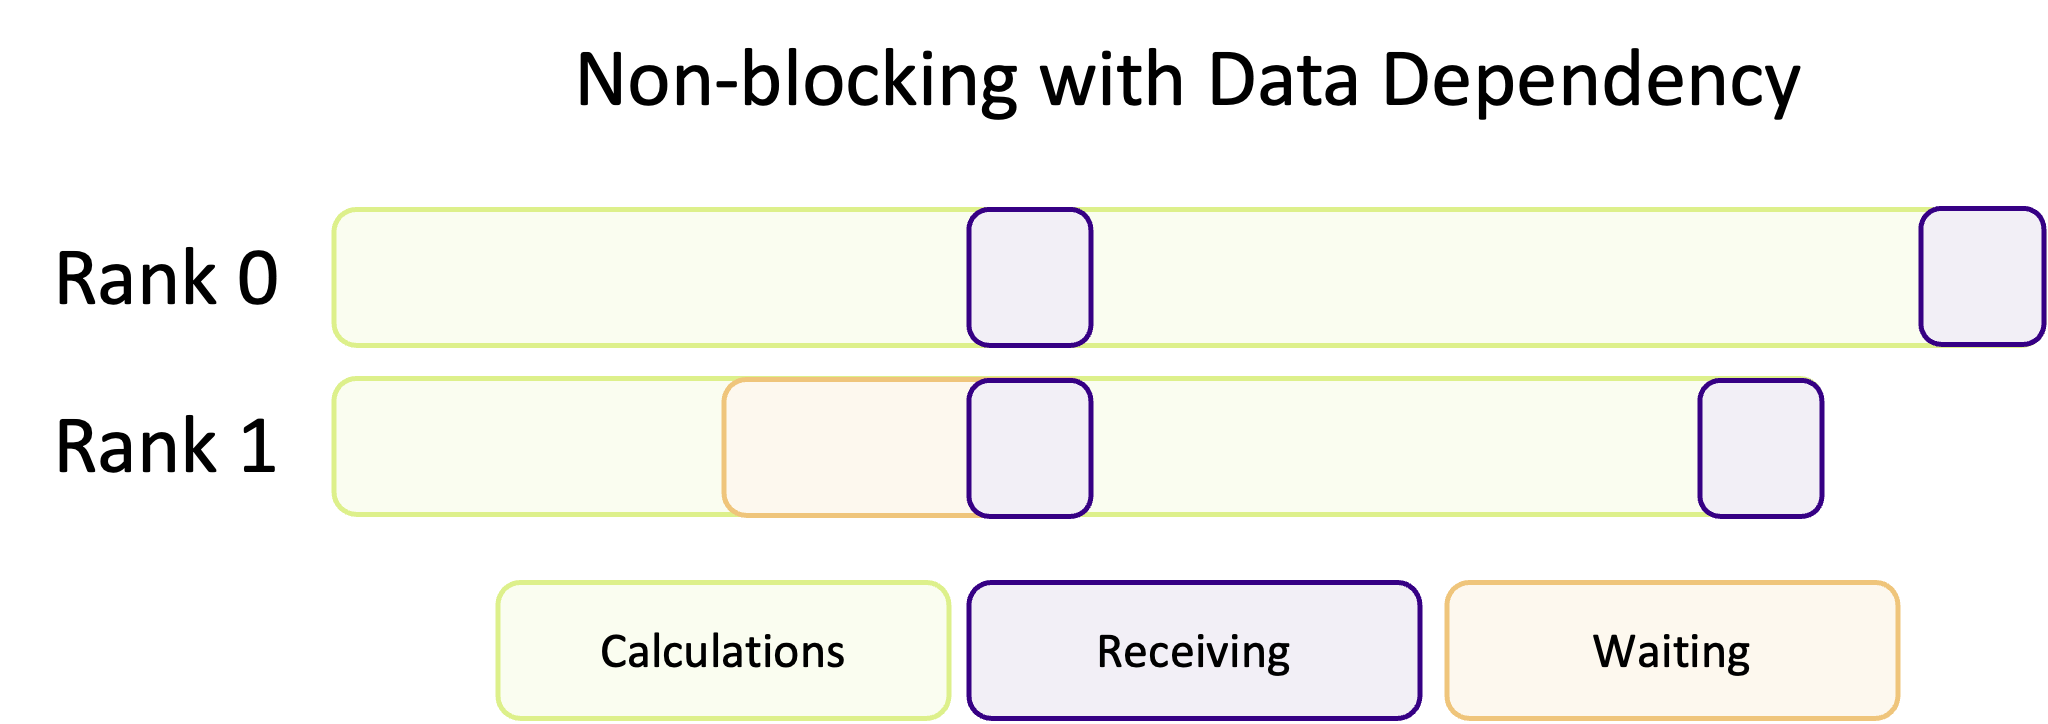 Non-blocking communication with data dependency